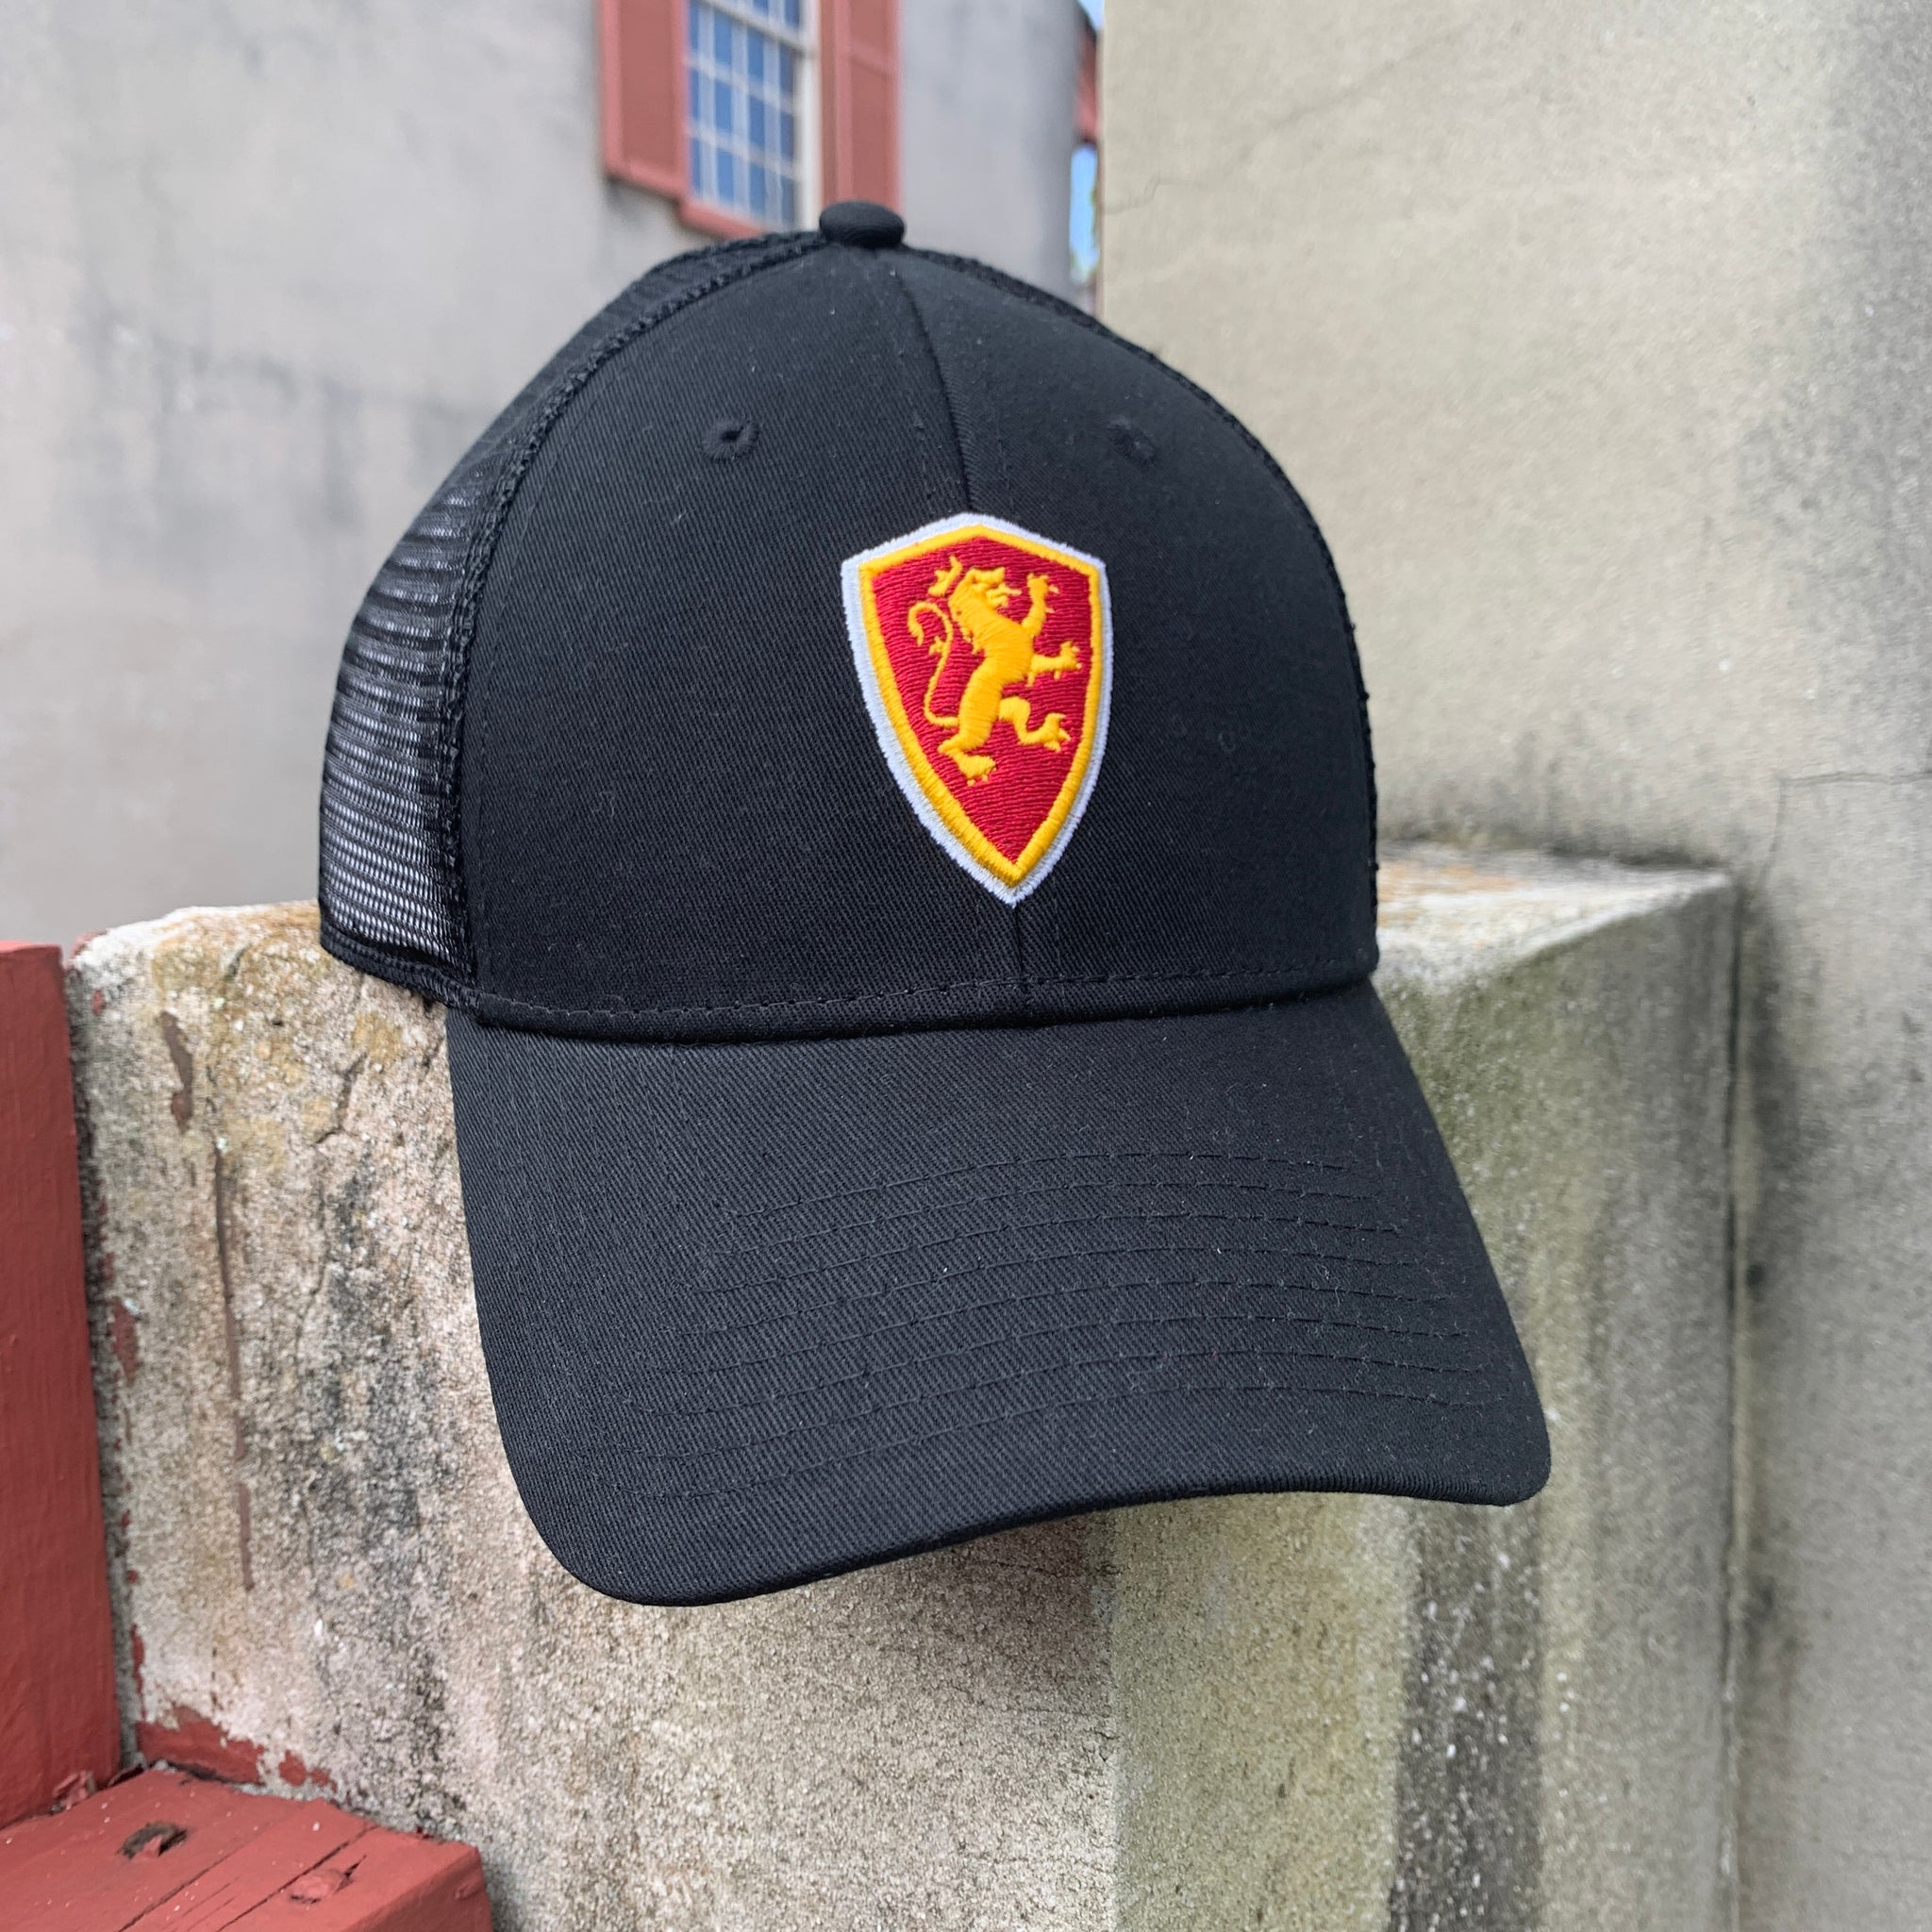 Black hat with mesh back with Flagler shield logo in middle